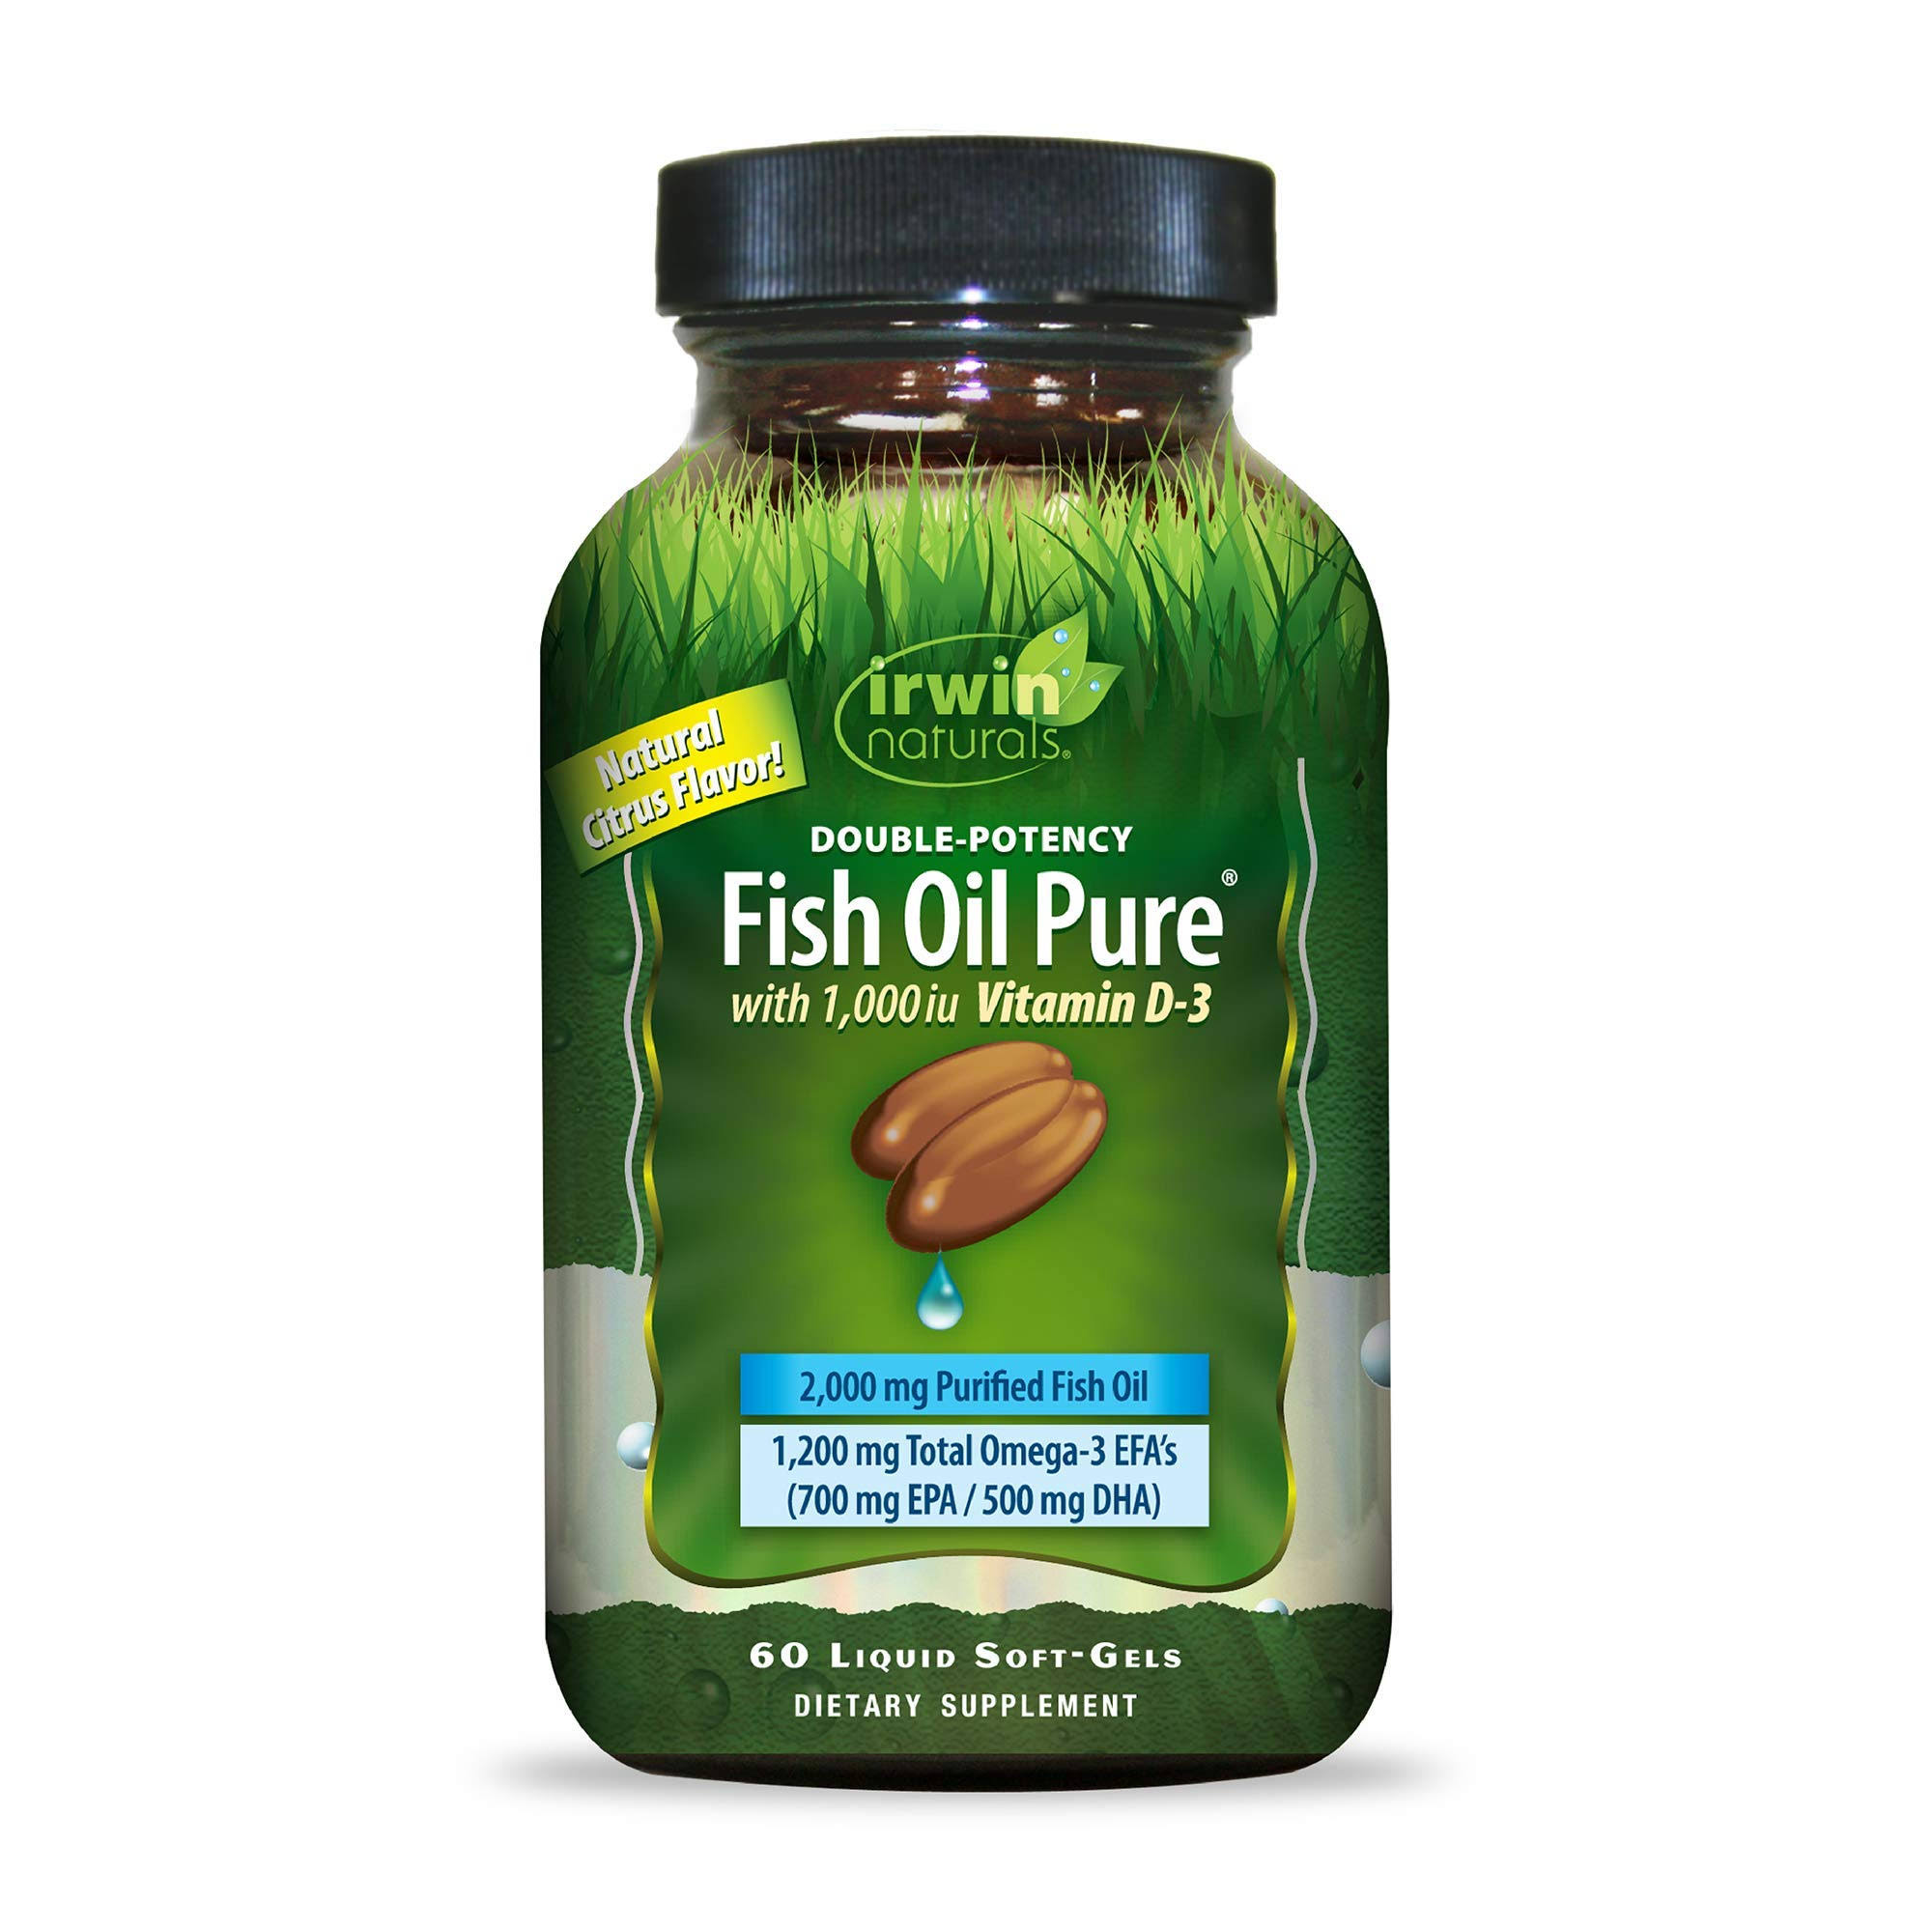 Irwin Naturals Double-Potency Fish Oil Pure Supplement - with 1,000 IU Vitamin D3, 60ct